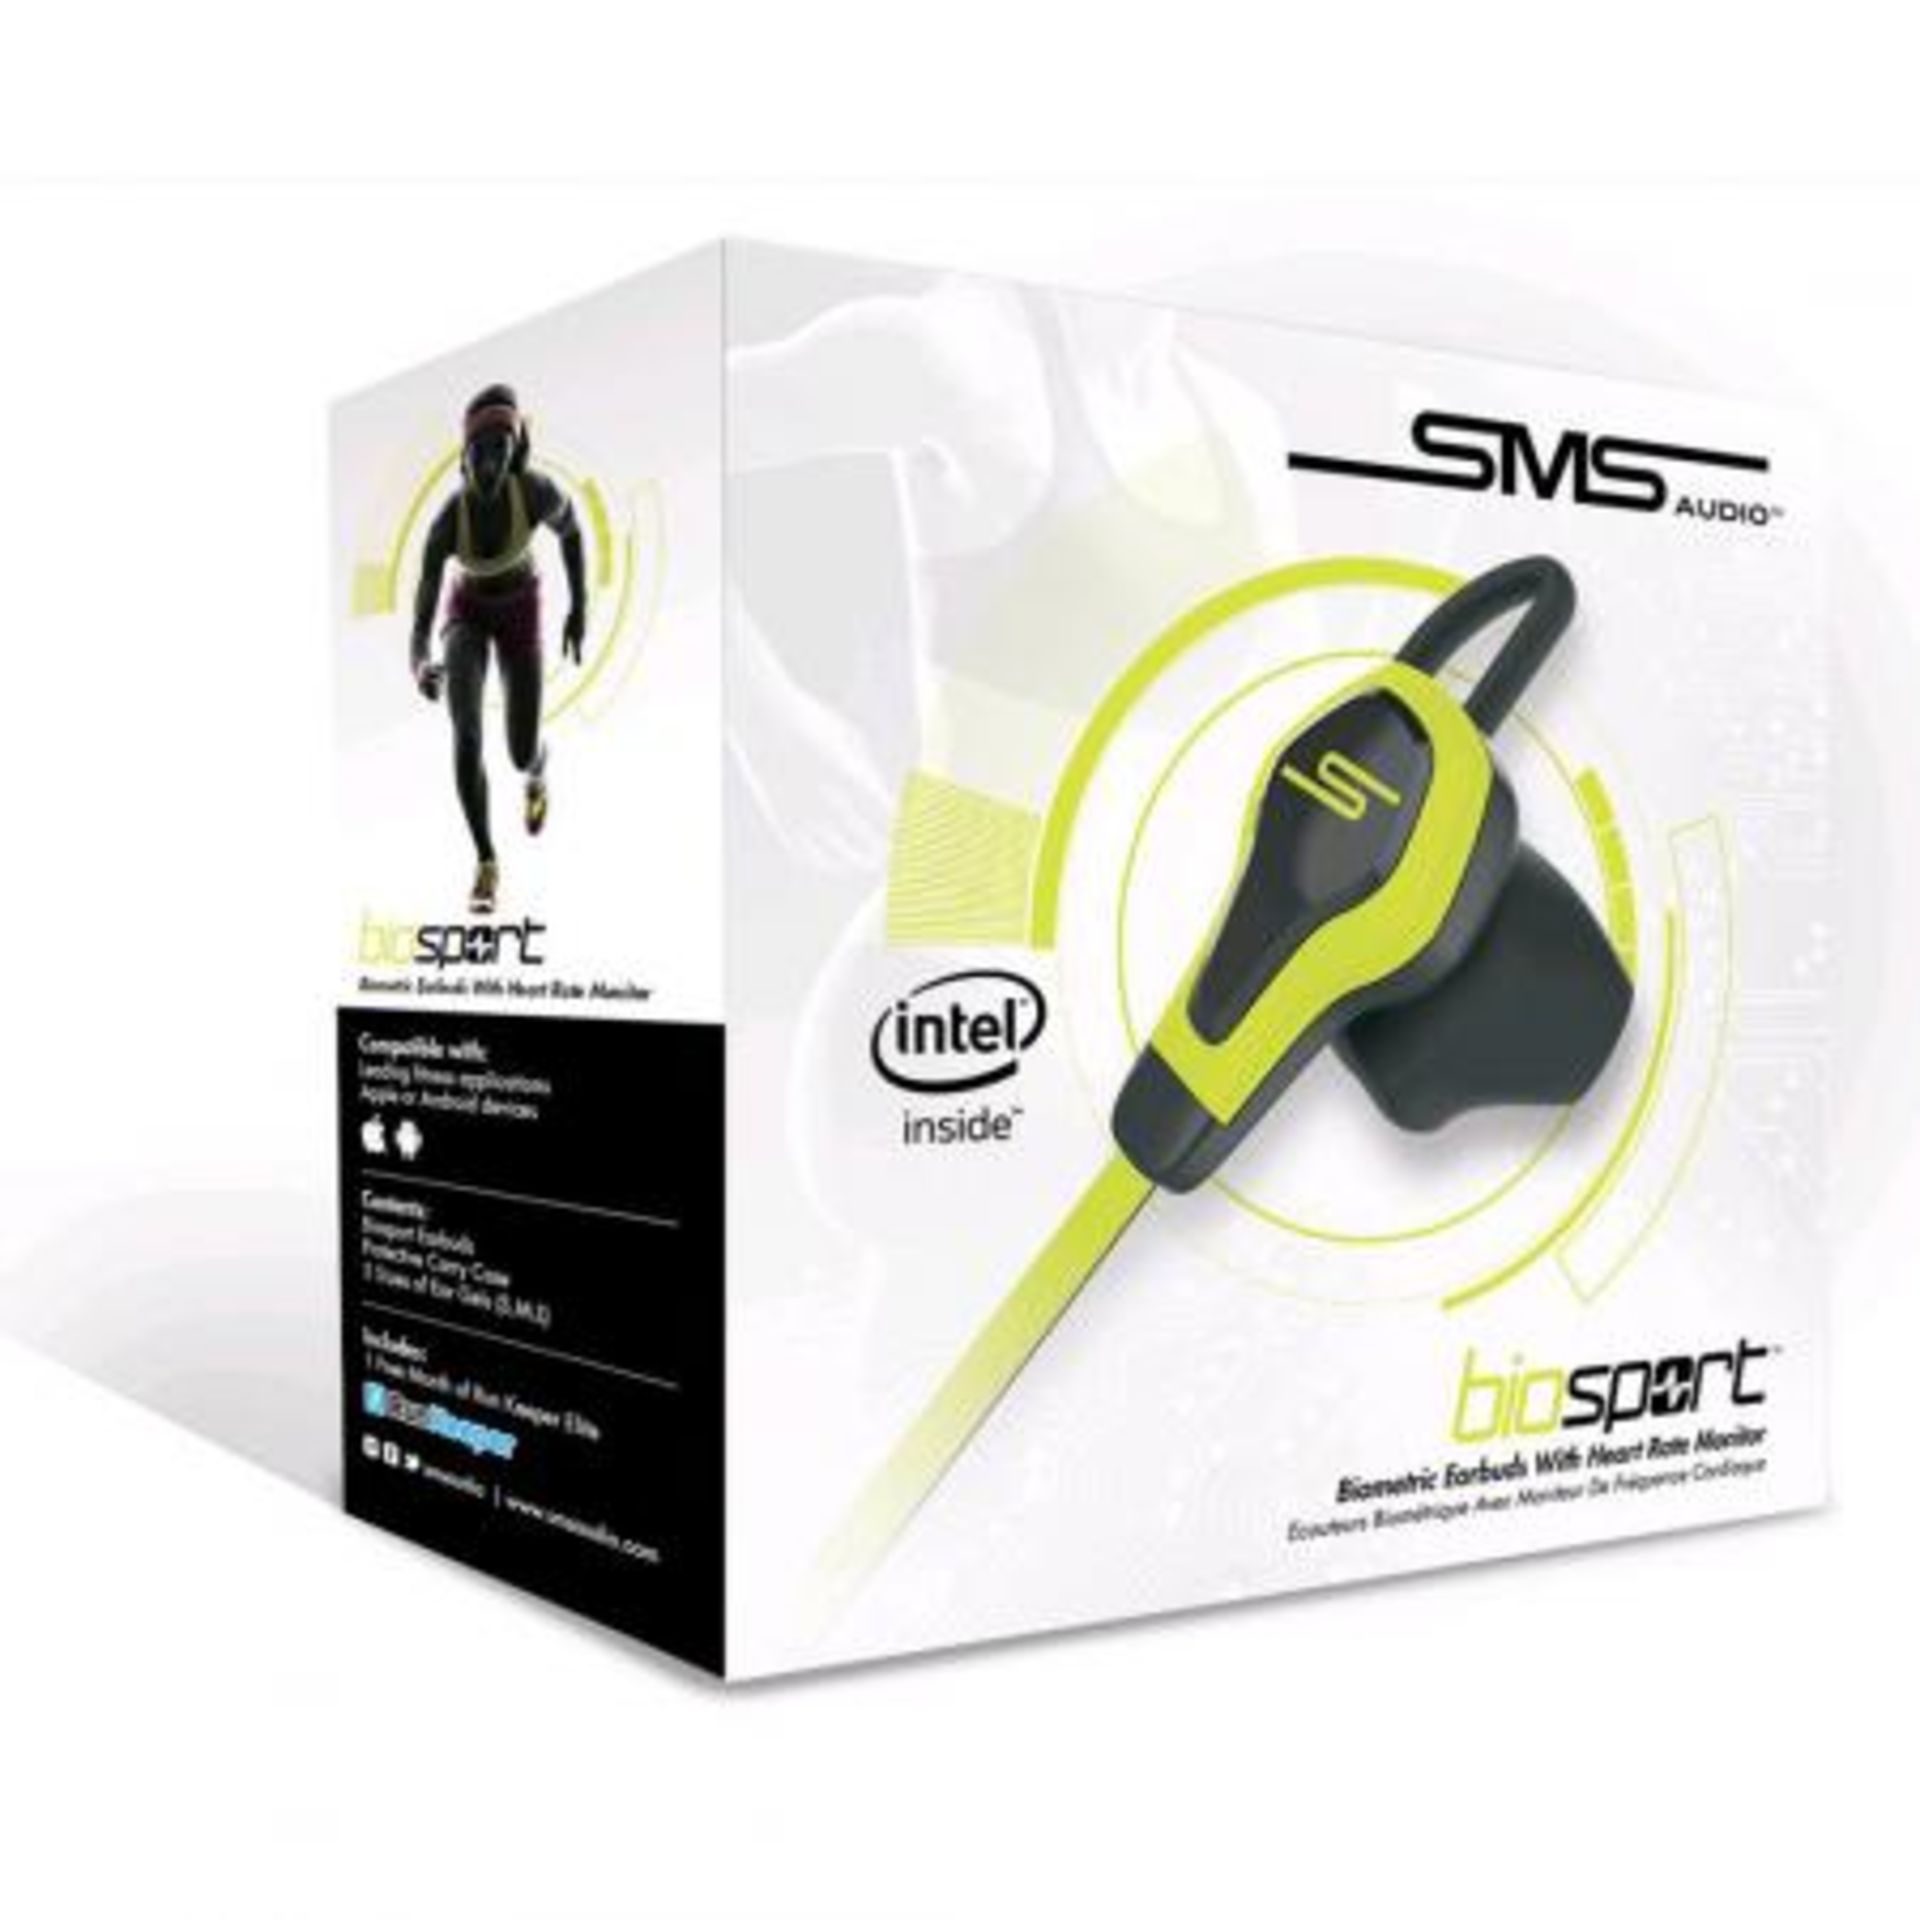 V Brand New SMS Audio BioSport Earphones - RRP £149.99 - Heart Rate Monitor Measures Changes In